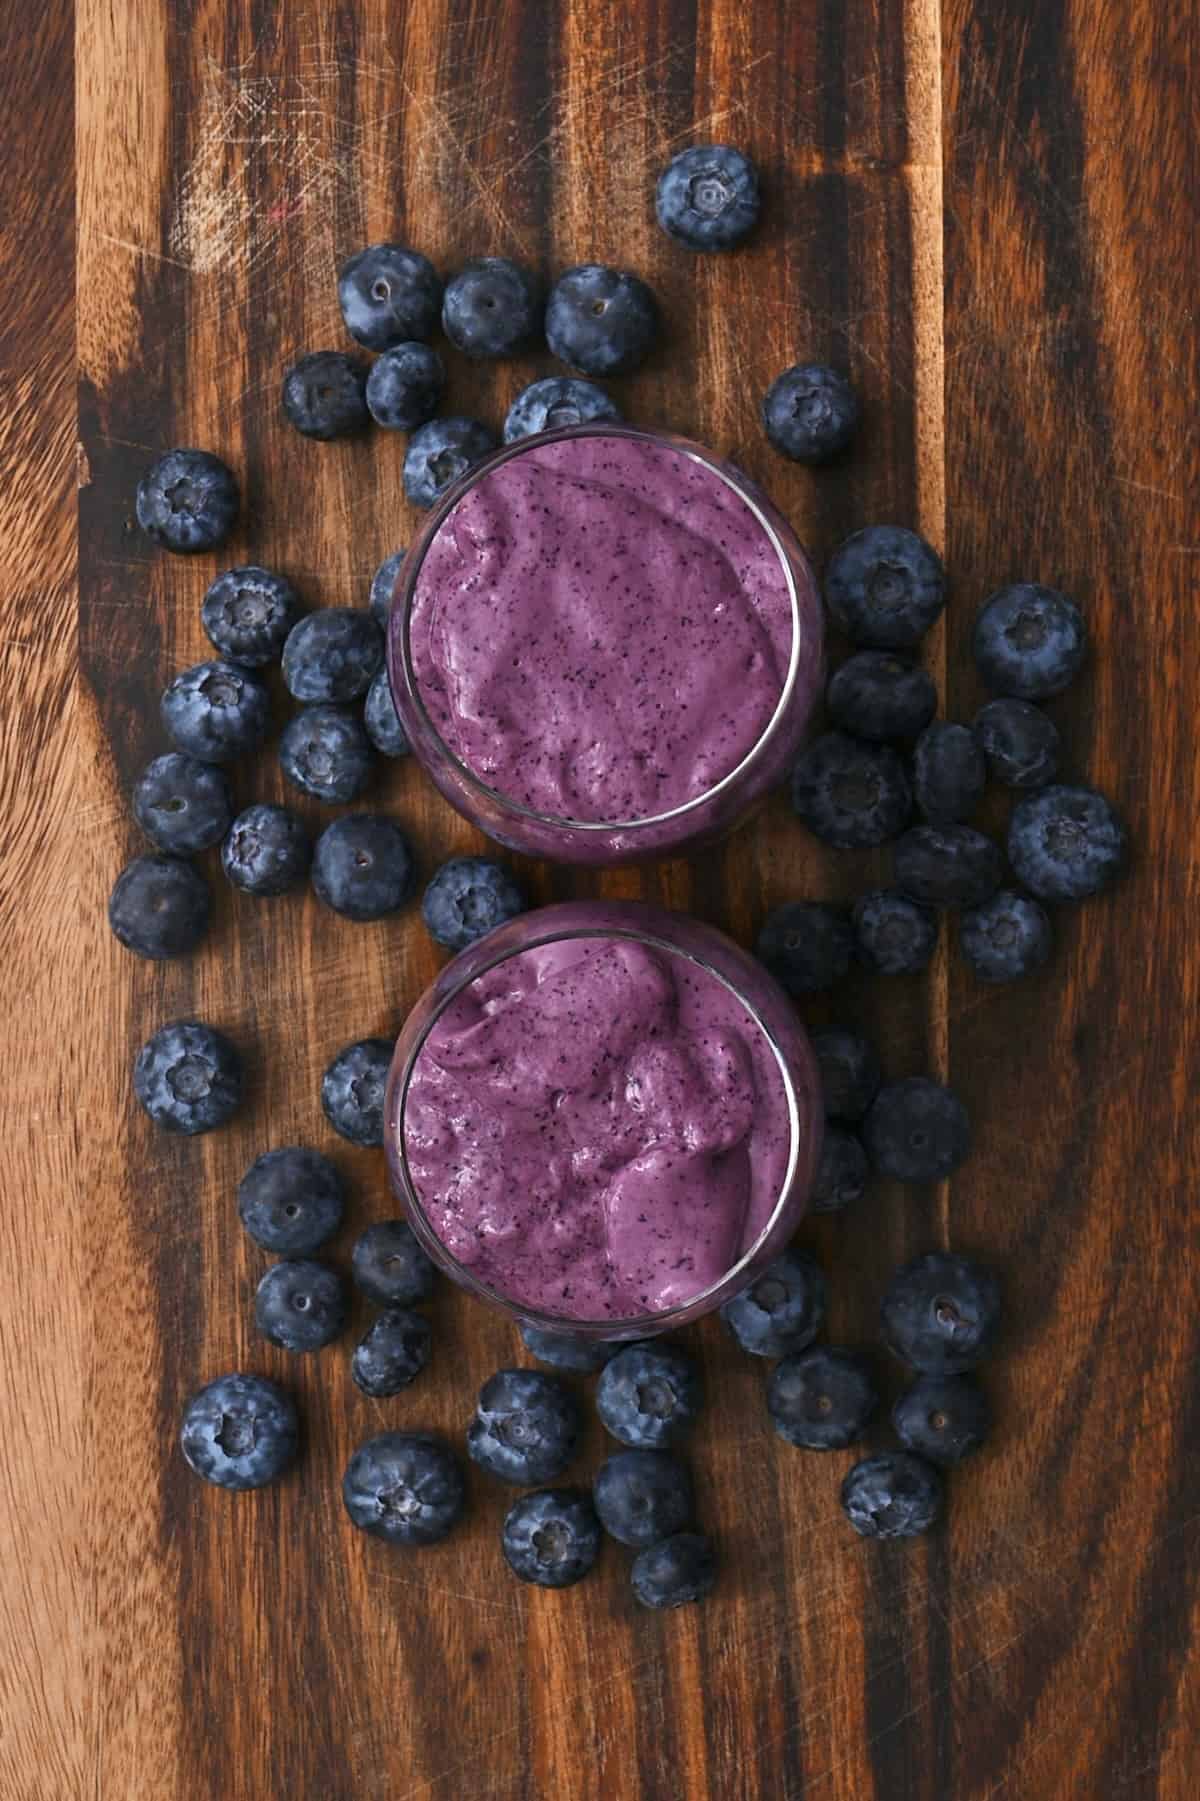 Top view of two glasses with purple smoothie and blueberries around them